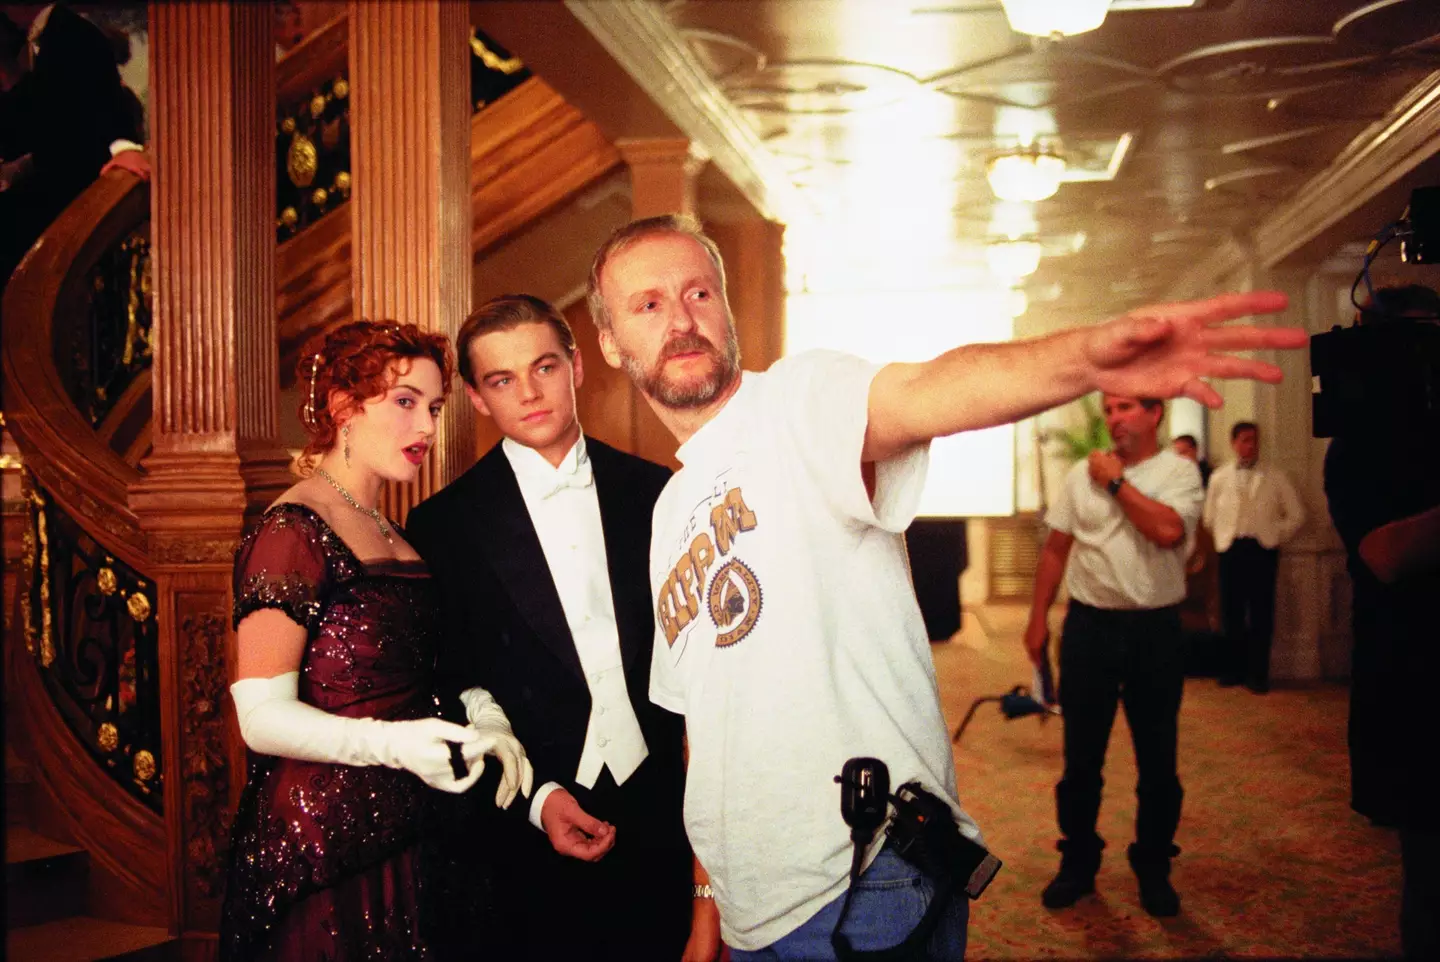 Leonardo Dicaprio, Kate Winslet, and director James Cameron on the set of Titanic.